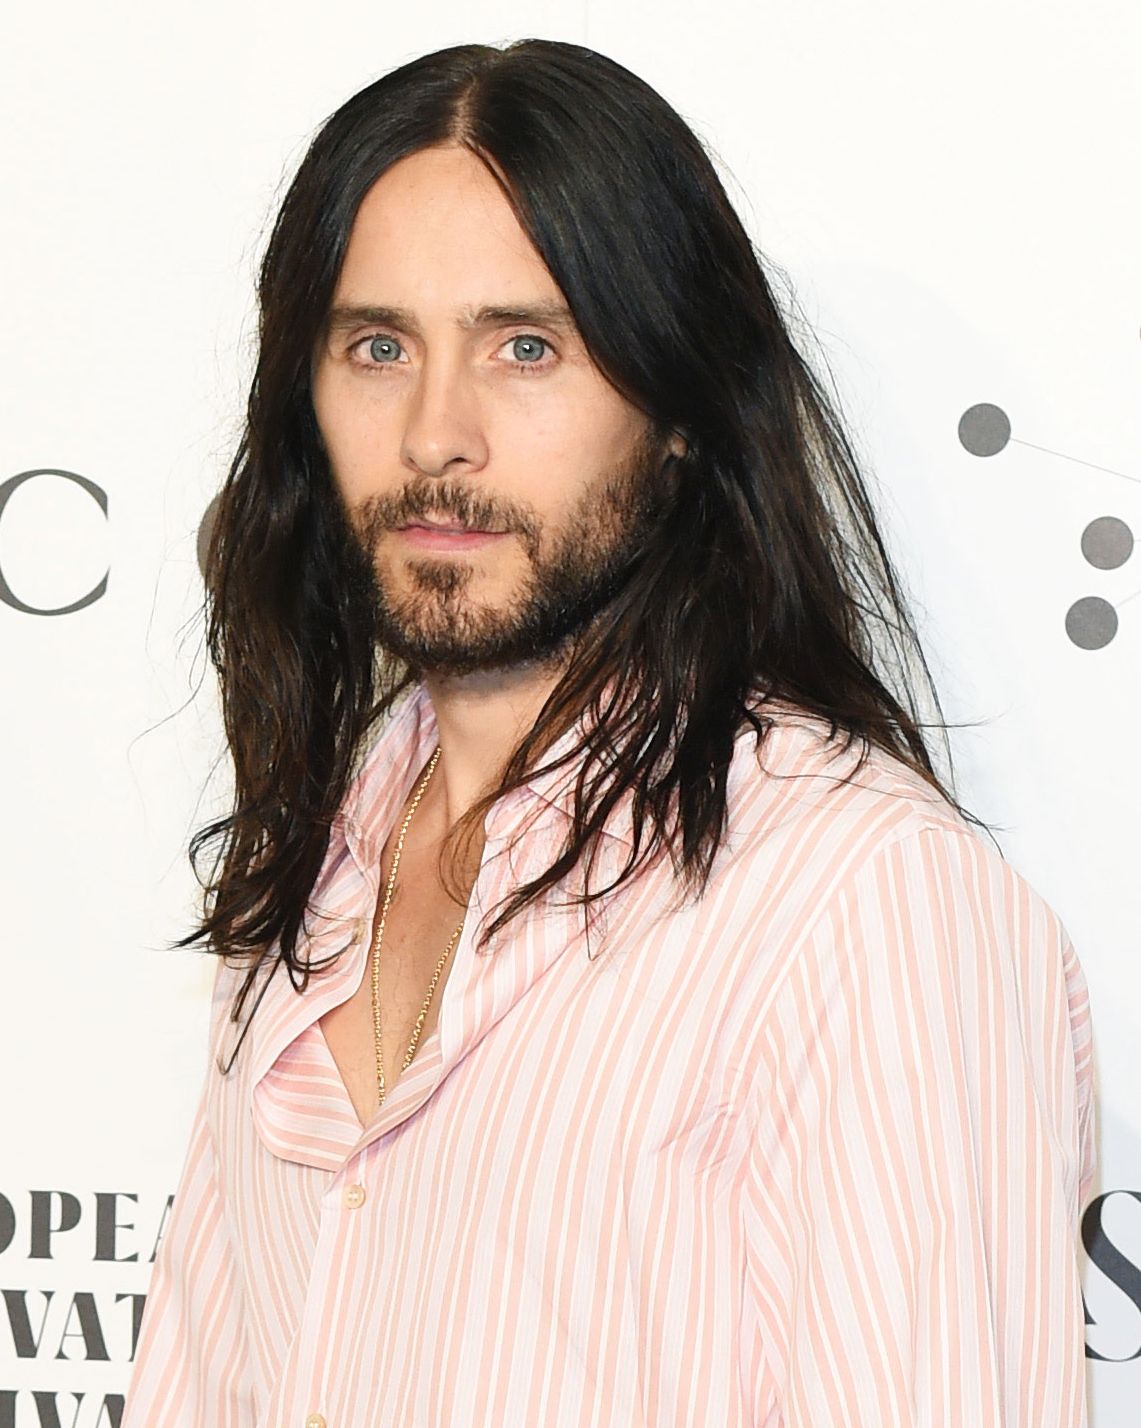 Jared Leto Learned About Coronavirus After 12 Day Meditation